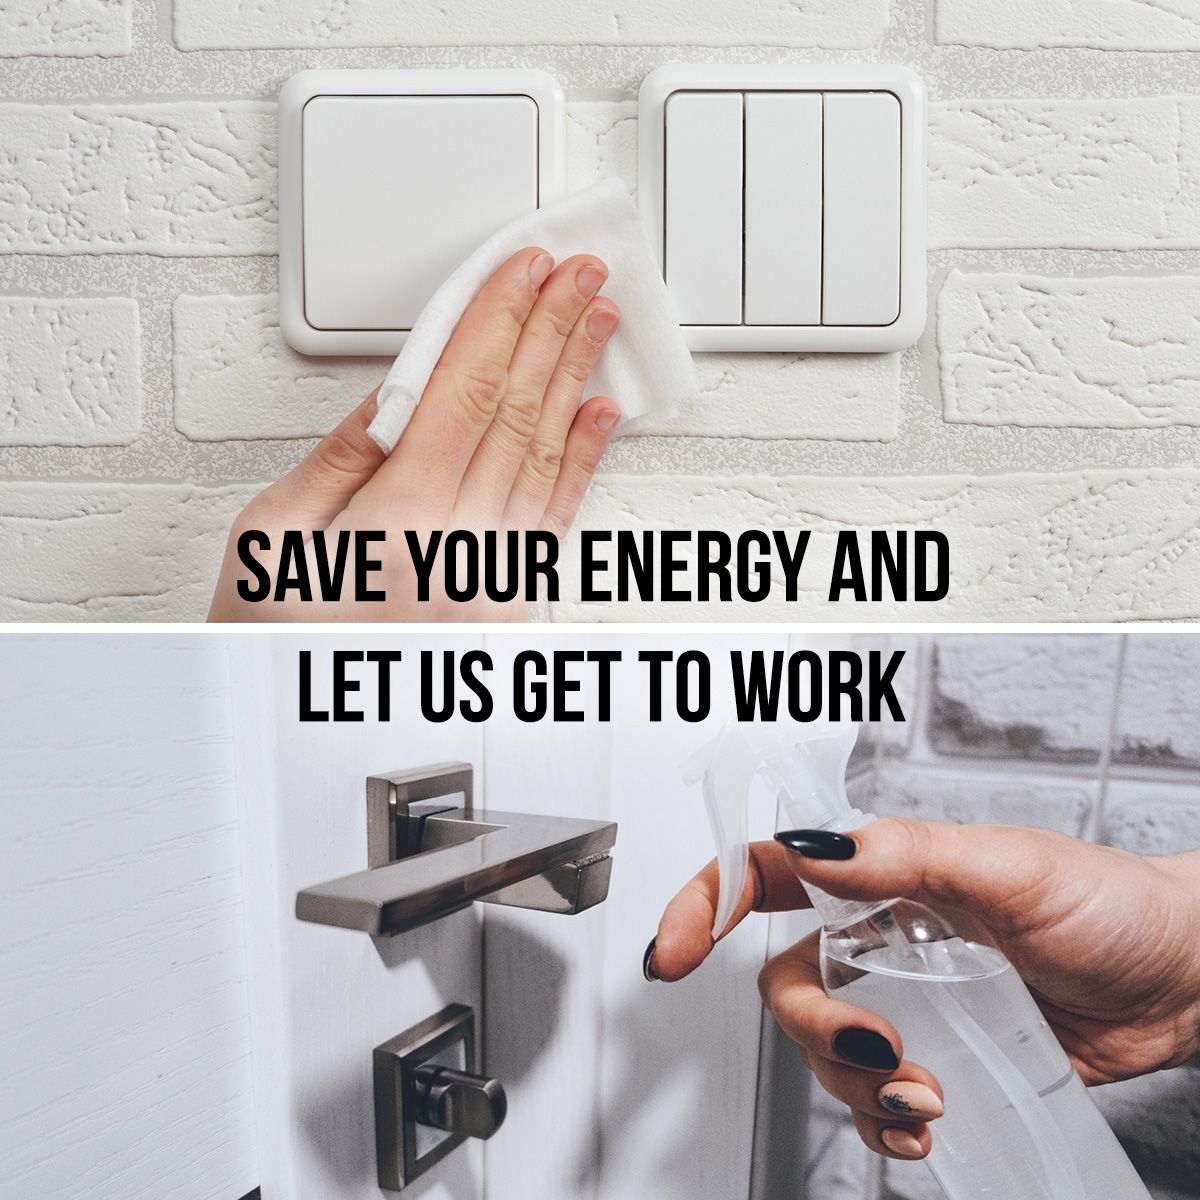 Save Your Energy and Let Us Get to Work